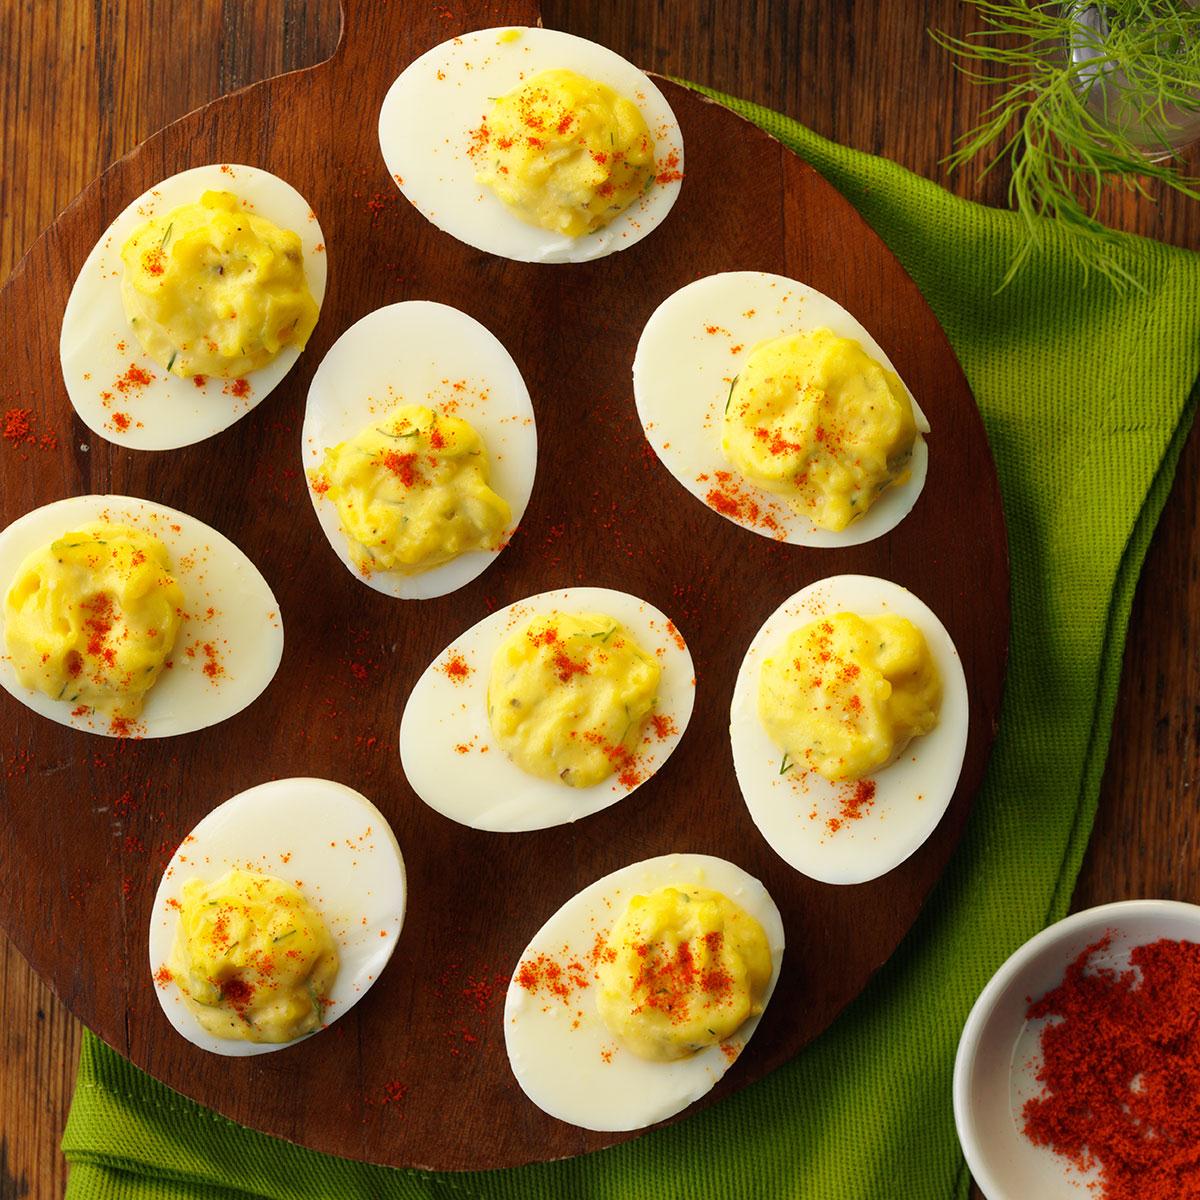 People say, "Wow!" when they taste these flavorful tangy deviled eggs. The bold combination of ground mustard, dill and horseradish is so appealing. The plate is always emptied whenever I serve these eggs. —Ruth Roth, Linville, North Carolina <a href="https://www.tasteofhome.com/recipes/horseradish-deviled-eggs/">Get Recipe</a>